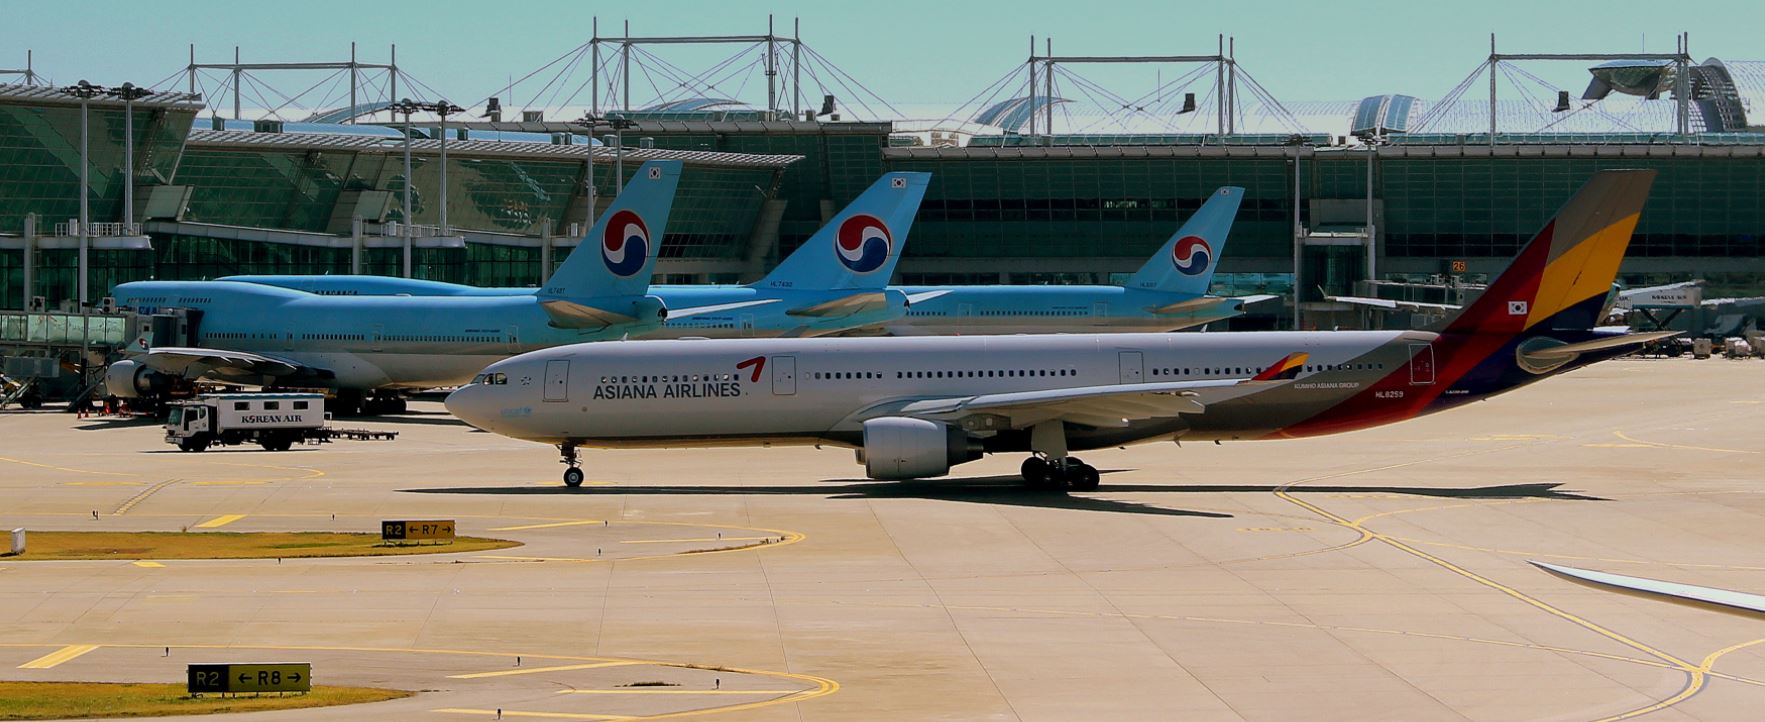 Korean Airlines to Acquire Asiana